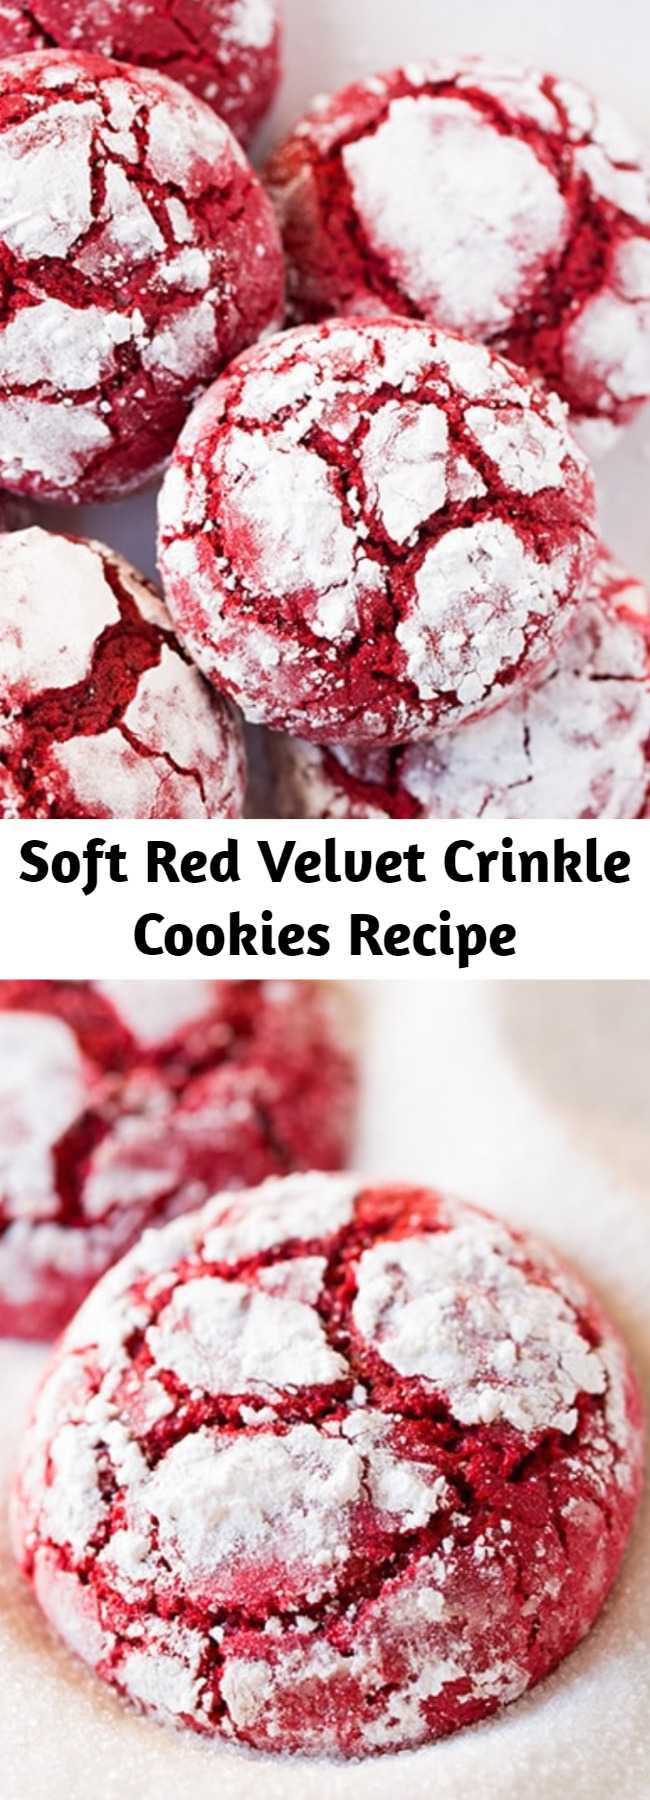 Soft Red Velvet Crinkle Cookies Recipe - Red Velvet Crinkle Cookies are a new perfect Christmas cookie! They're deliciously soft and have the classic flavors and stunning color of a red velvet cake but in individual cookie form. They're coated with sweet dusting of powdered sugar and once baked up end with pretty little crackles to impress.